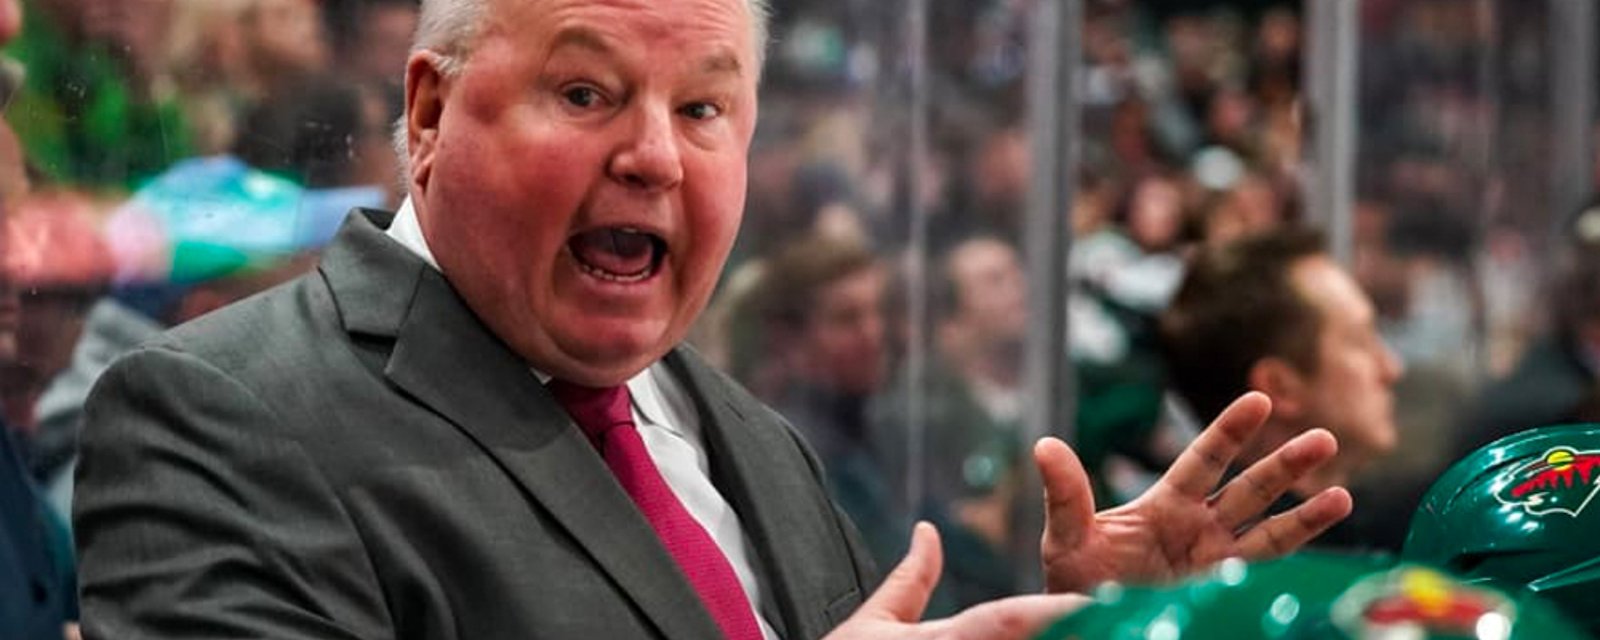 Leafs officially ask Wild for permission to negotiate with Bruce Boudreau